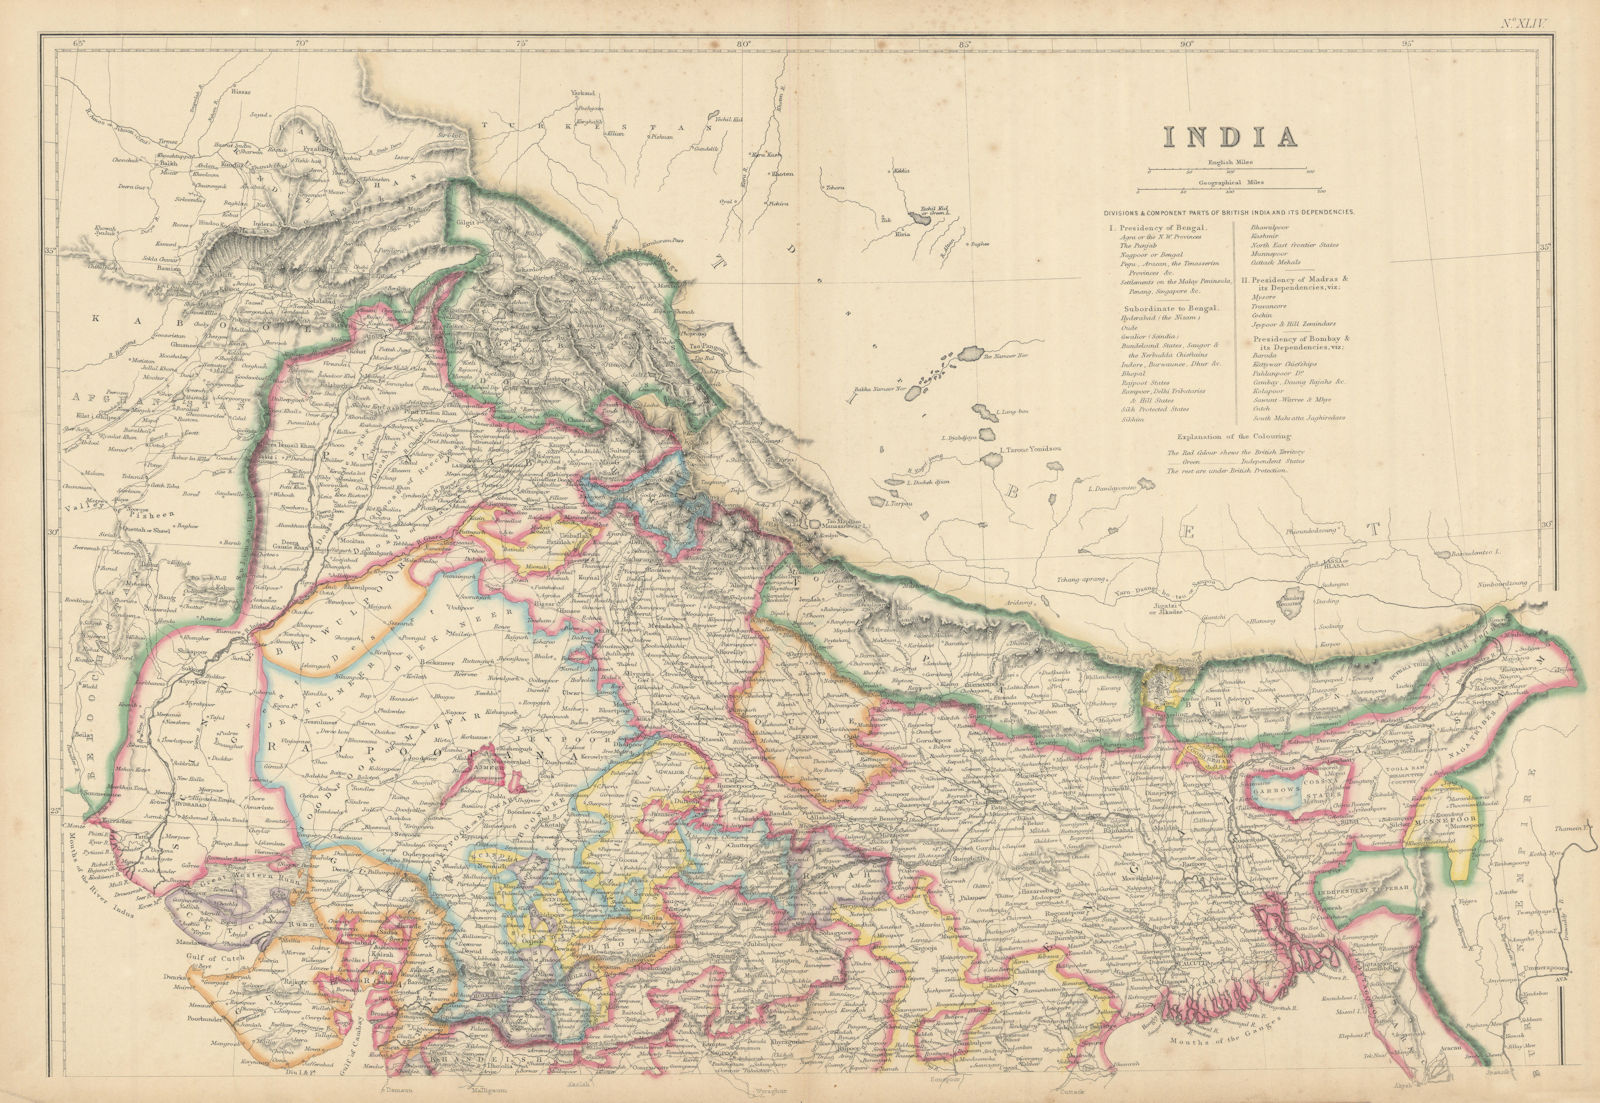 Associate Product Northern India. Independent Kashmir. Proposed railways. WELLER 1860 old map